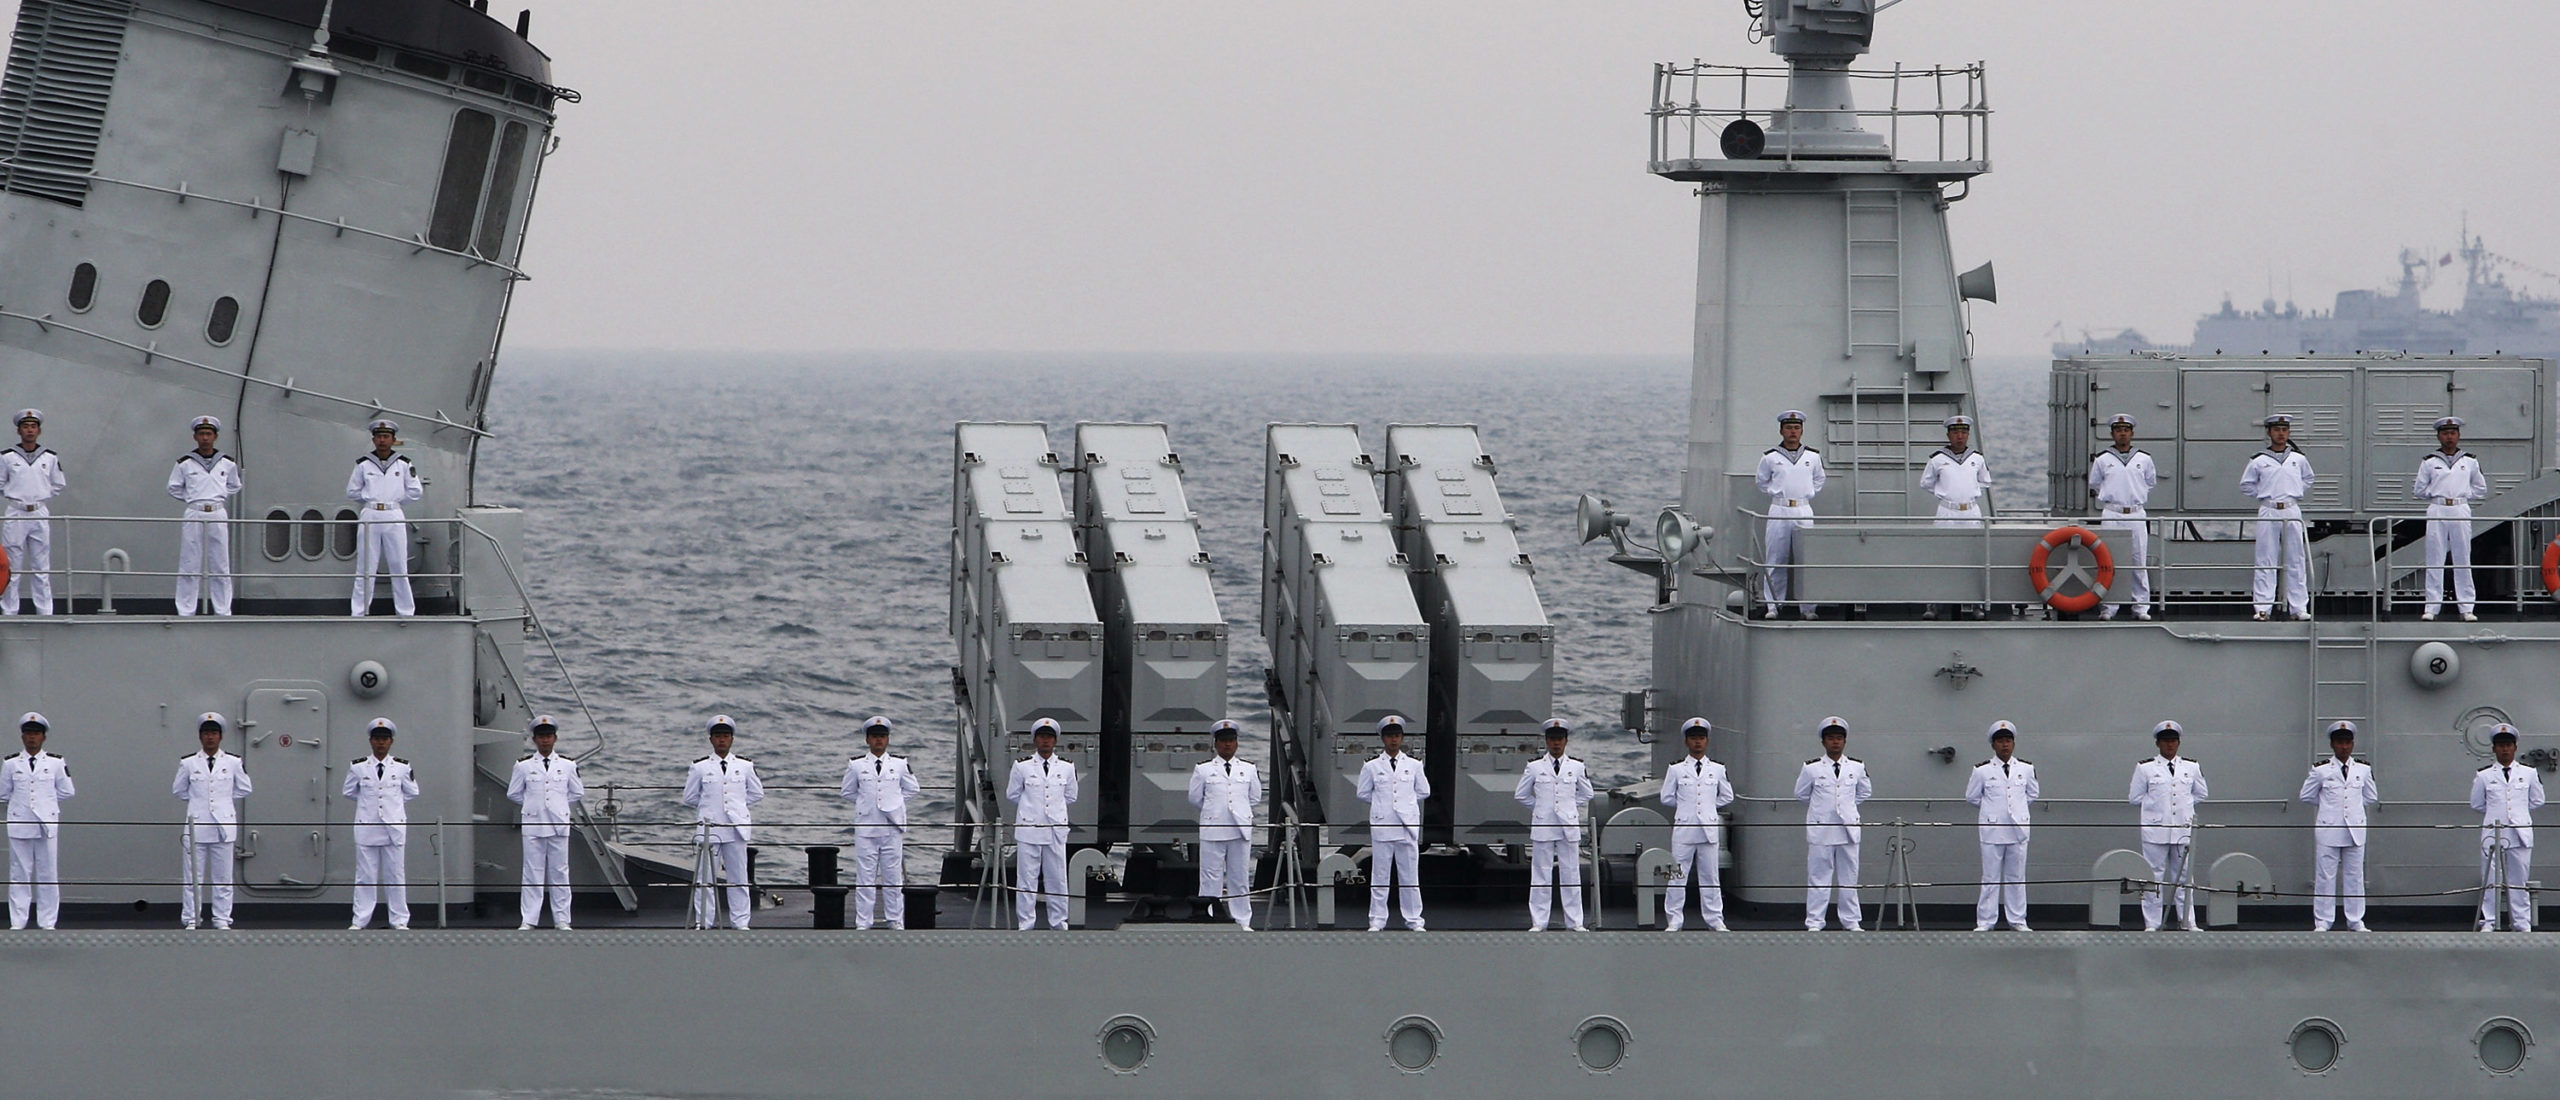 Chinese Navy sailors take part in an international fleet review to celebrate the 60th anniversary of the founding of the People's Liberation Army Navy in Qingdao, Shandong province April 23, 2009. (REUTERS/Guang Niu/Pool)